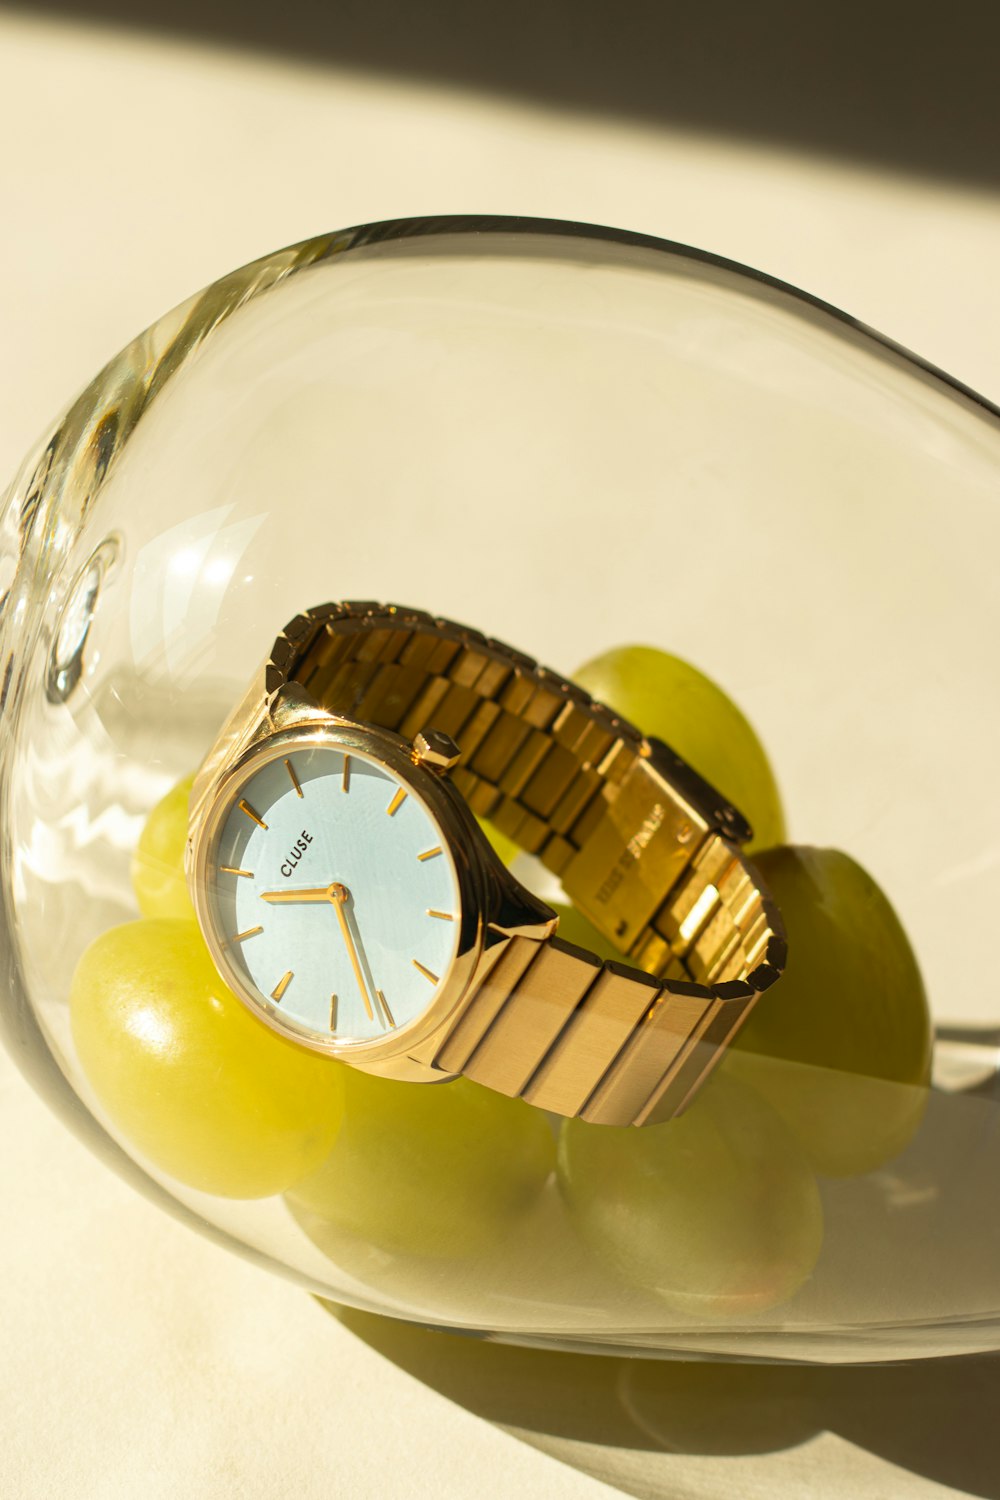 a watch and some grapes in a glass bowl